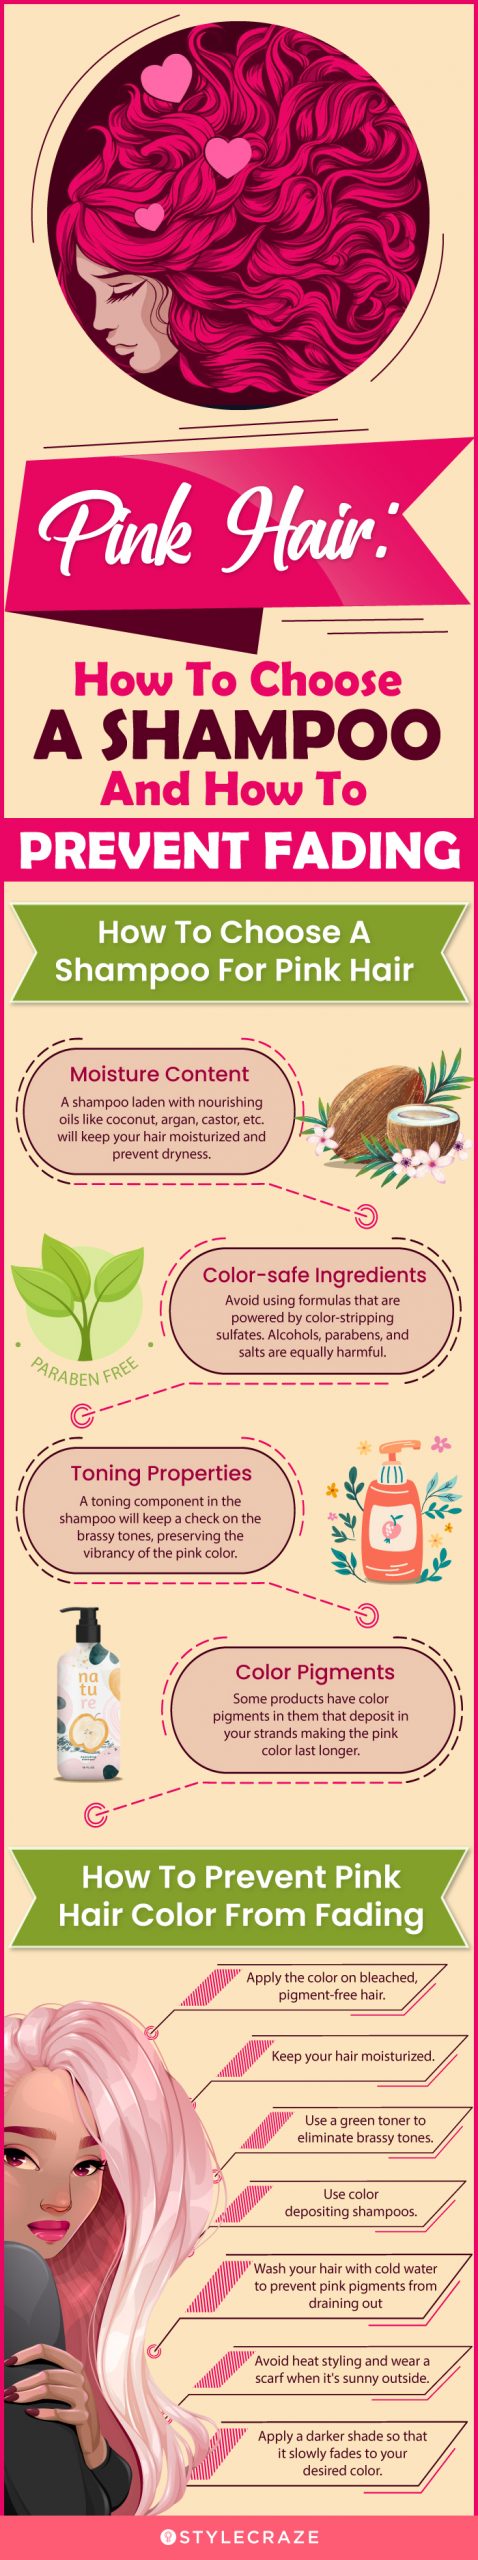 Pink Hair: How To Choose A Shampoo And How To Prevent Fading (infographic)